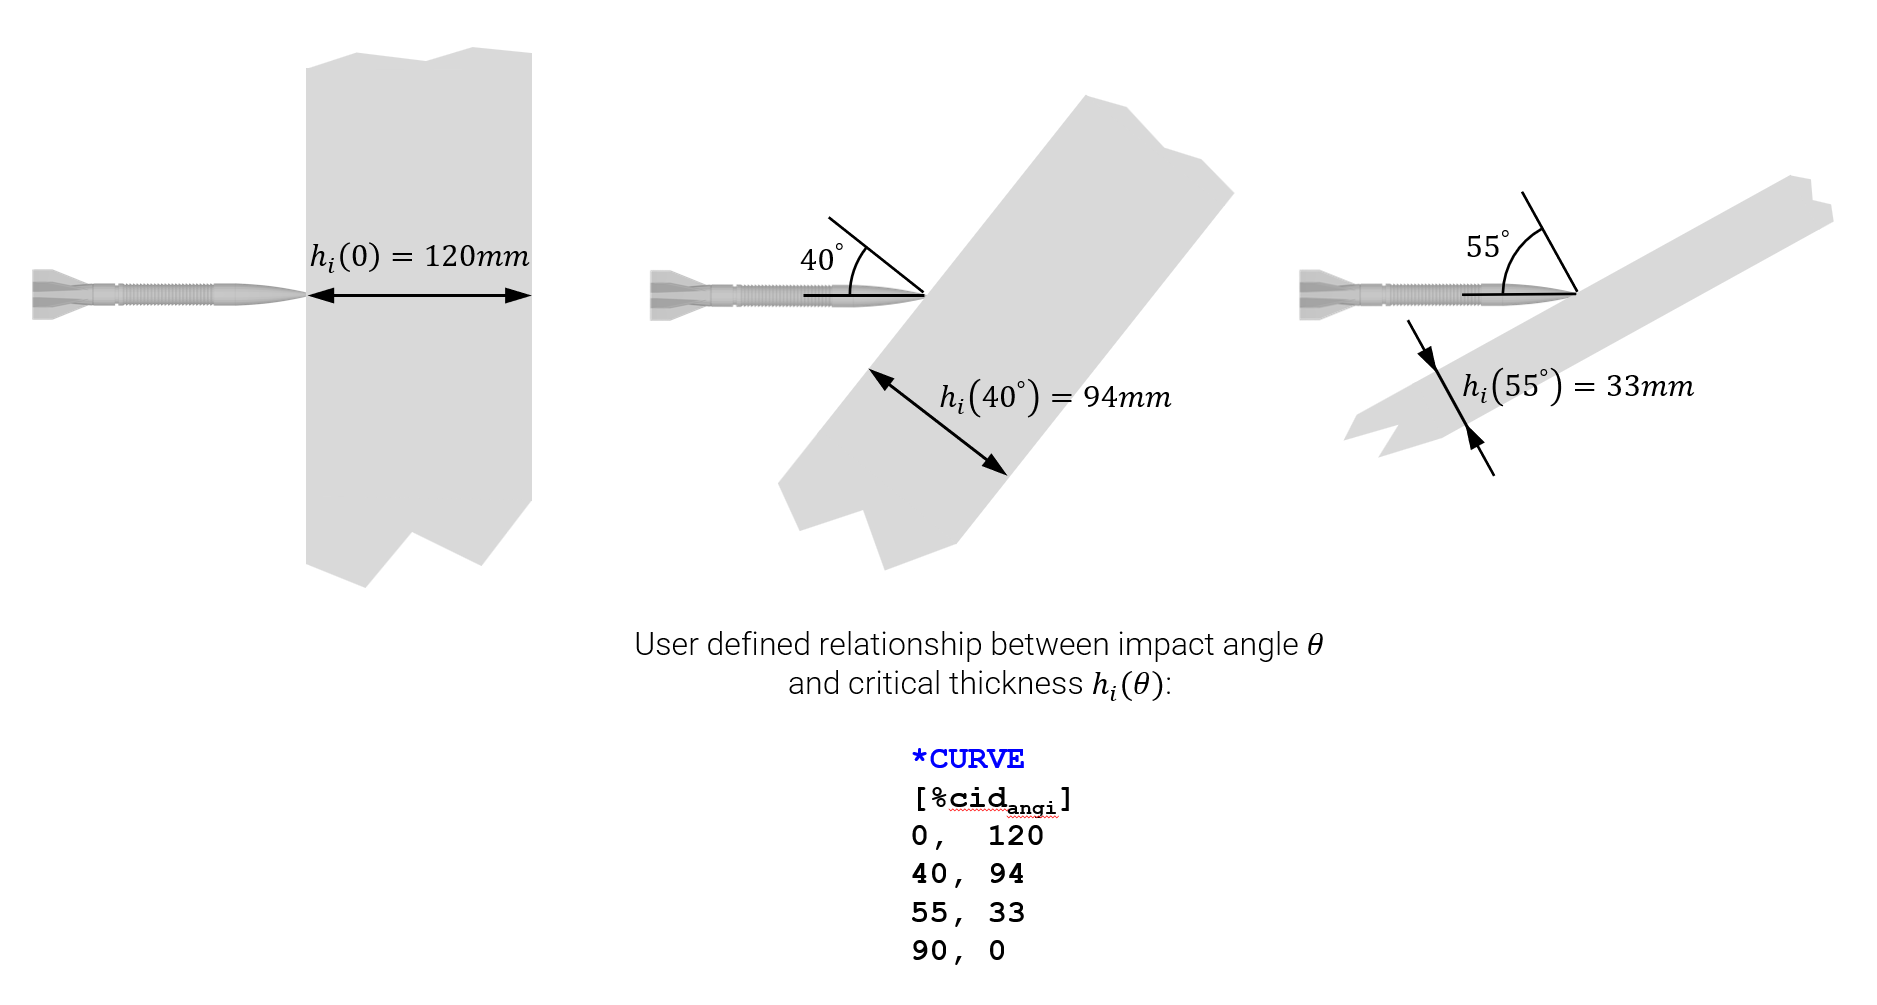 User defined critical thickness versus impact angle for material $mid_i$